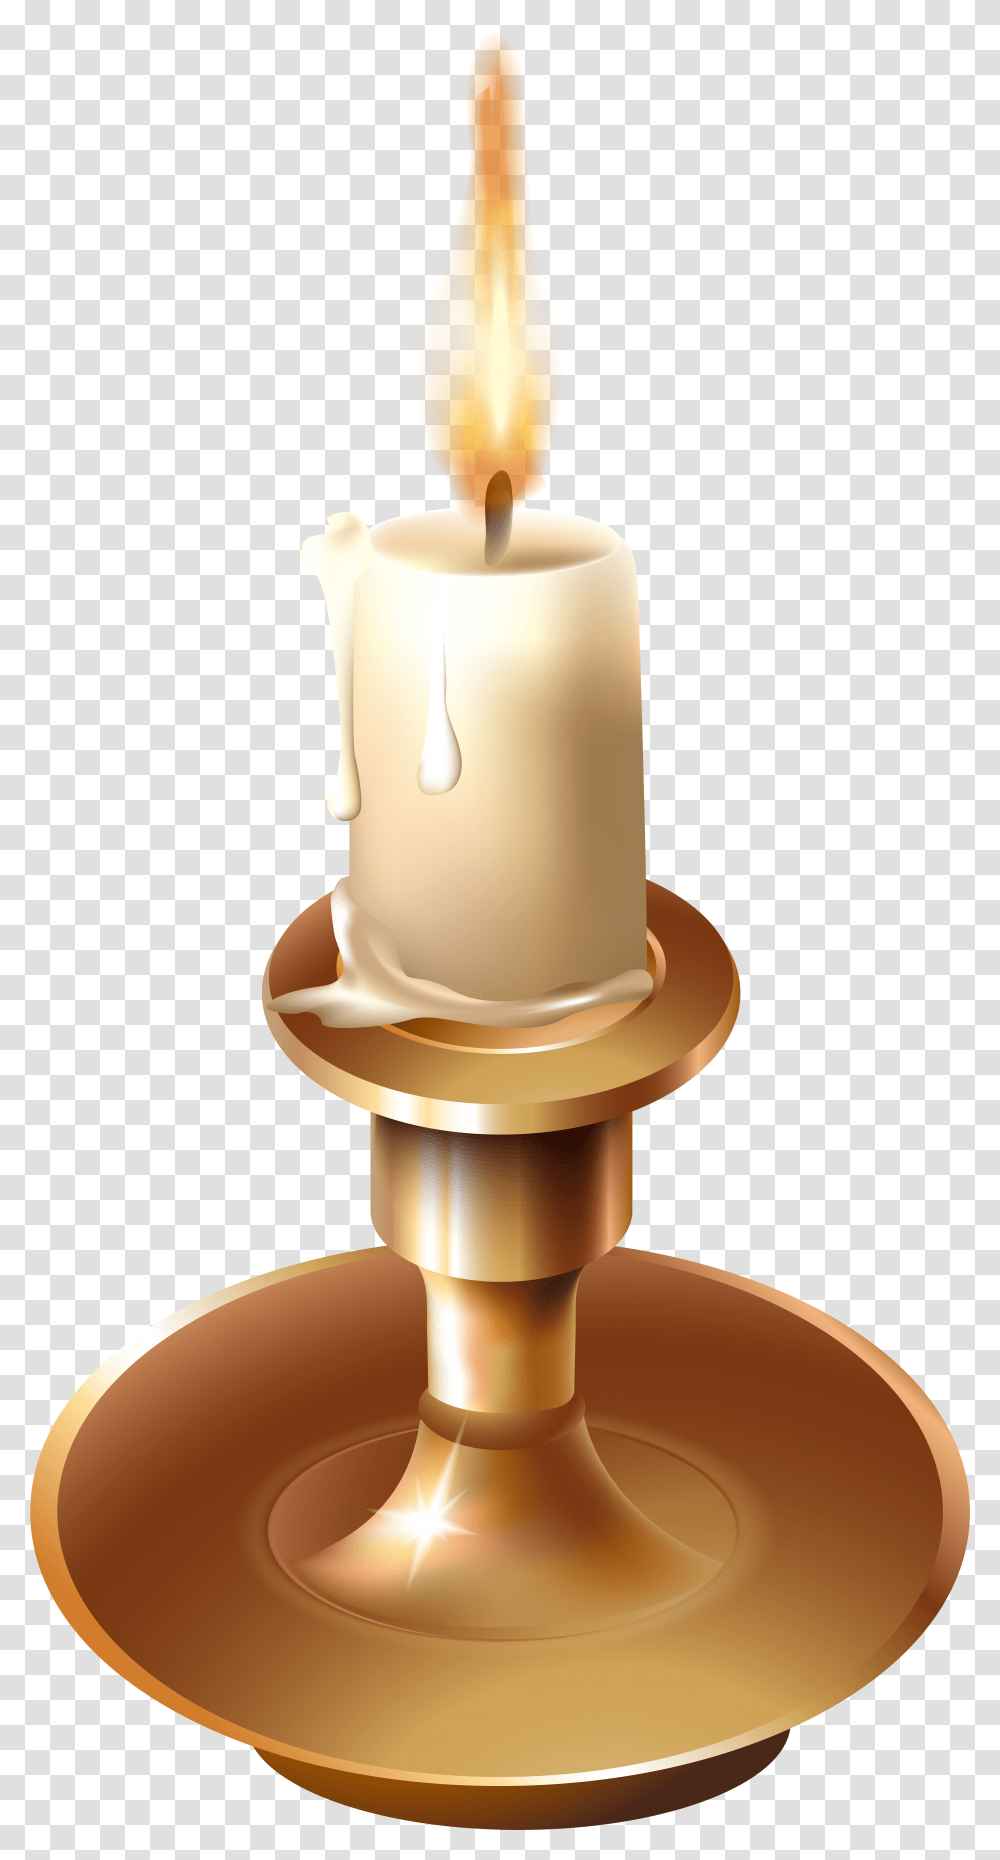 Clip Art Candlestick Clipart Candle In Candlestick Transparent Png